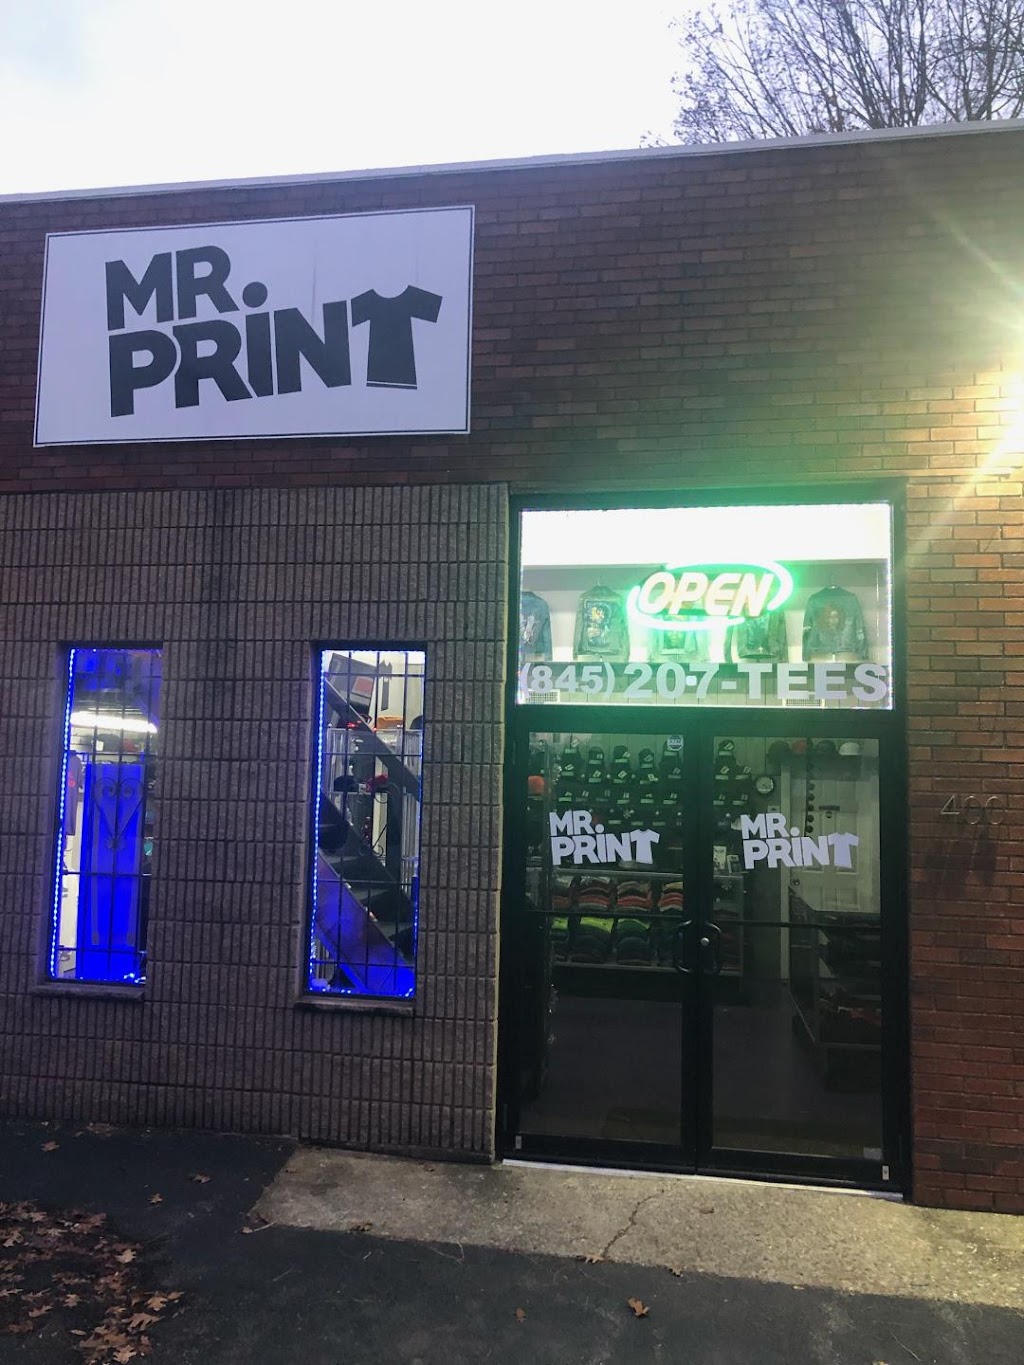 Mr.Print 845 Screen printing & Embroidery | 61 Quassaick Ave #400, New Windsor, NY 12553 | Phone: (845) 207-8337